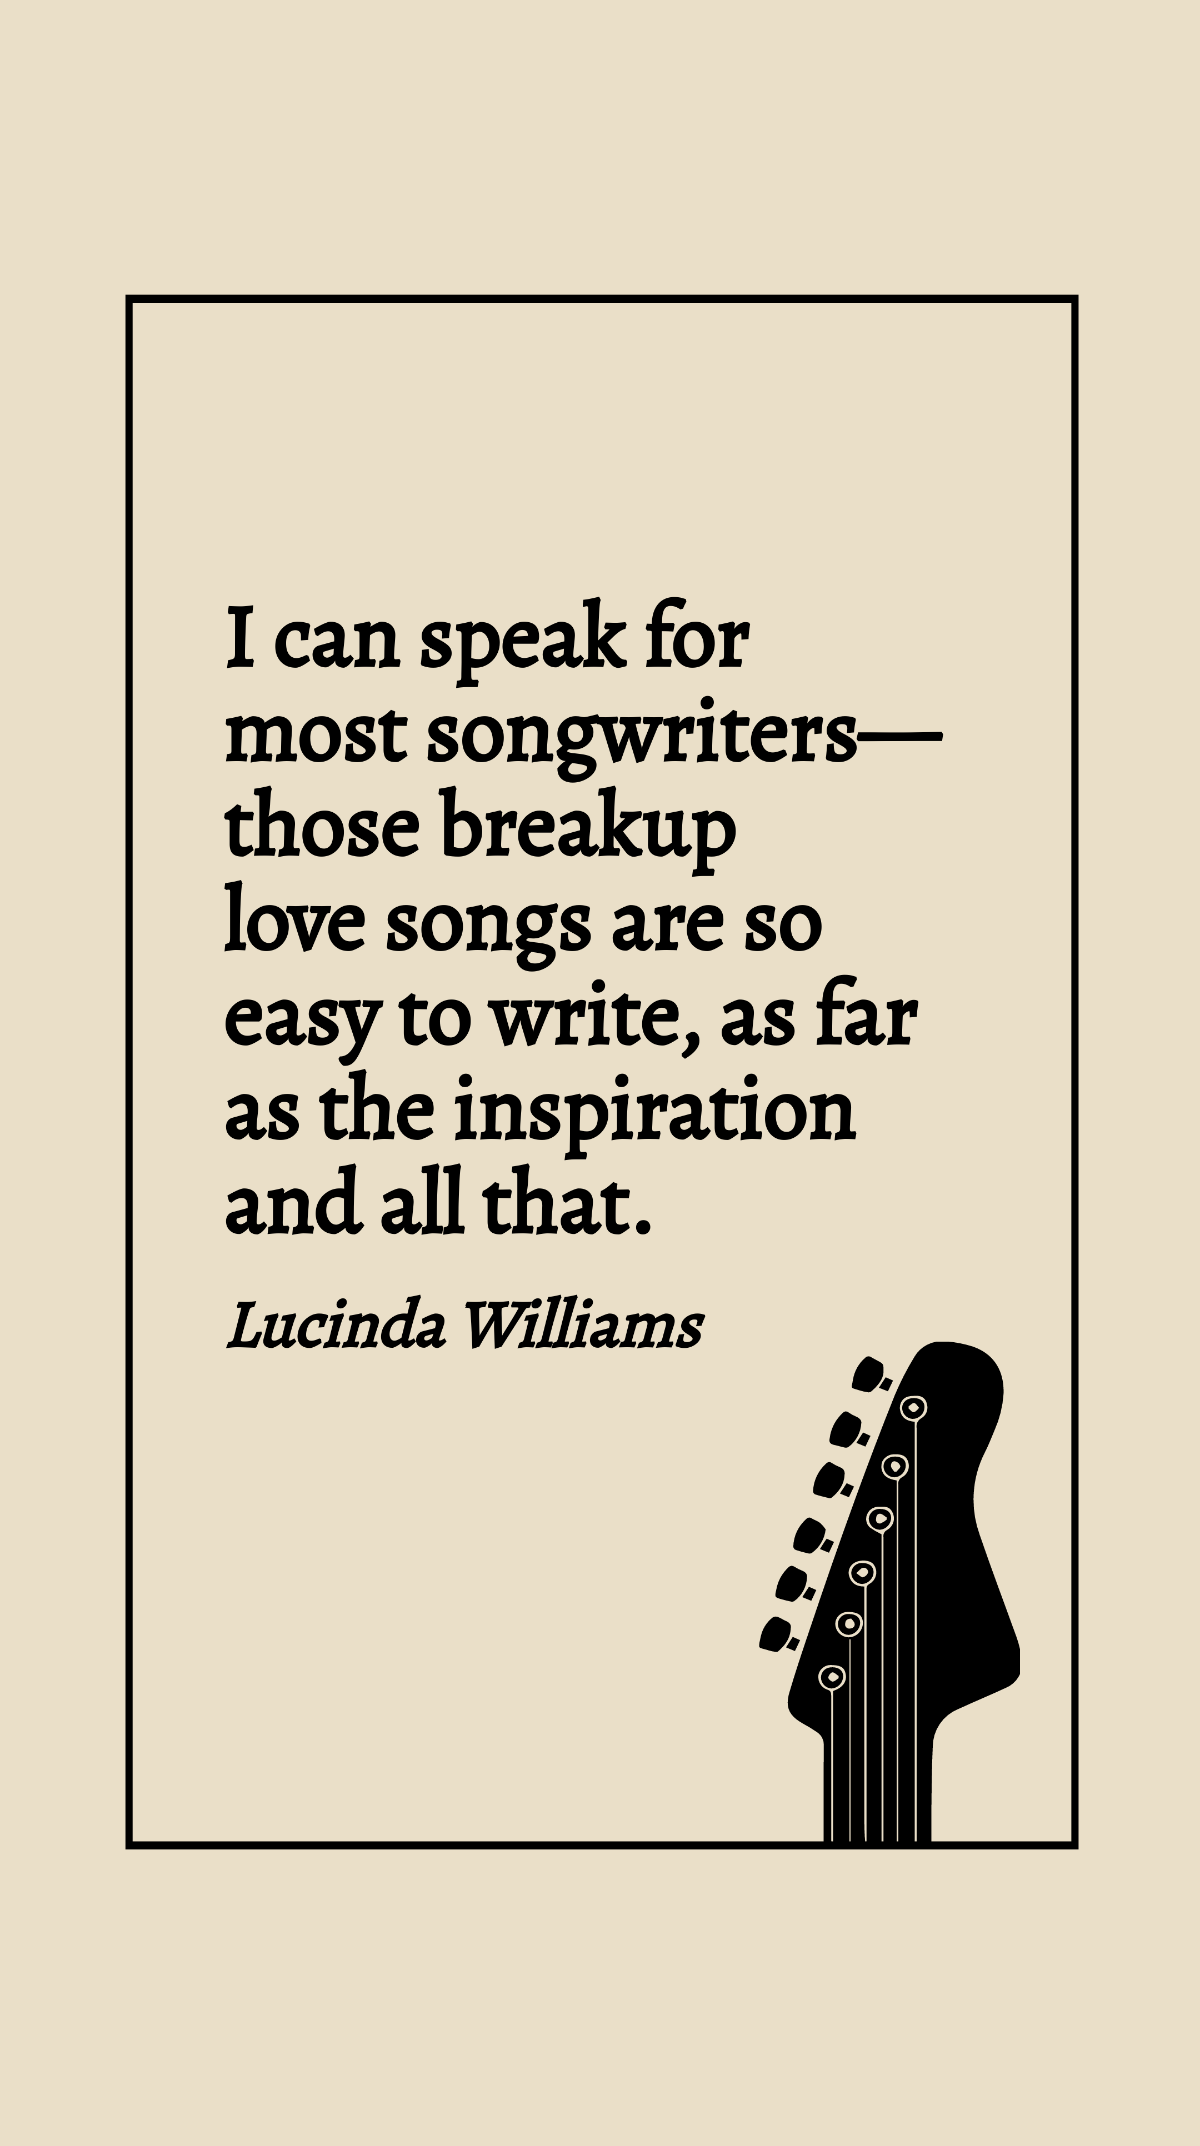 Free Lucinda Williams - I can speak for most songwriters - those breakup love songs are so easy to write, as far as the inspiration and all that. Template